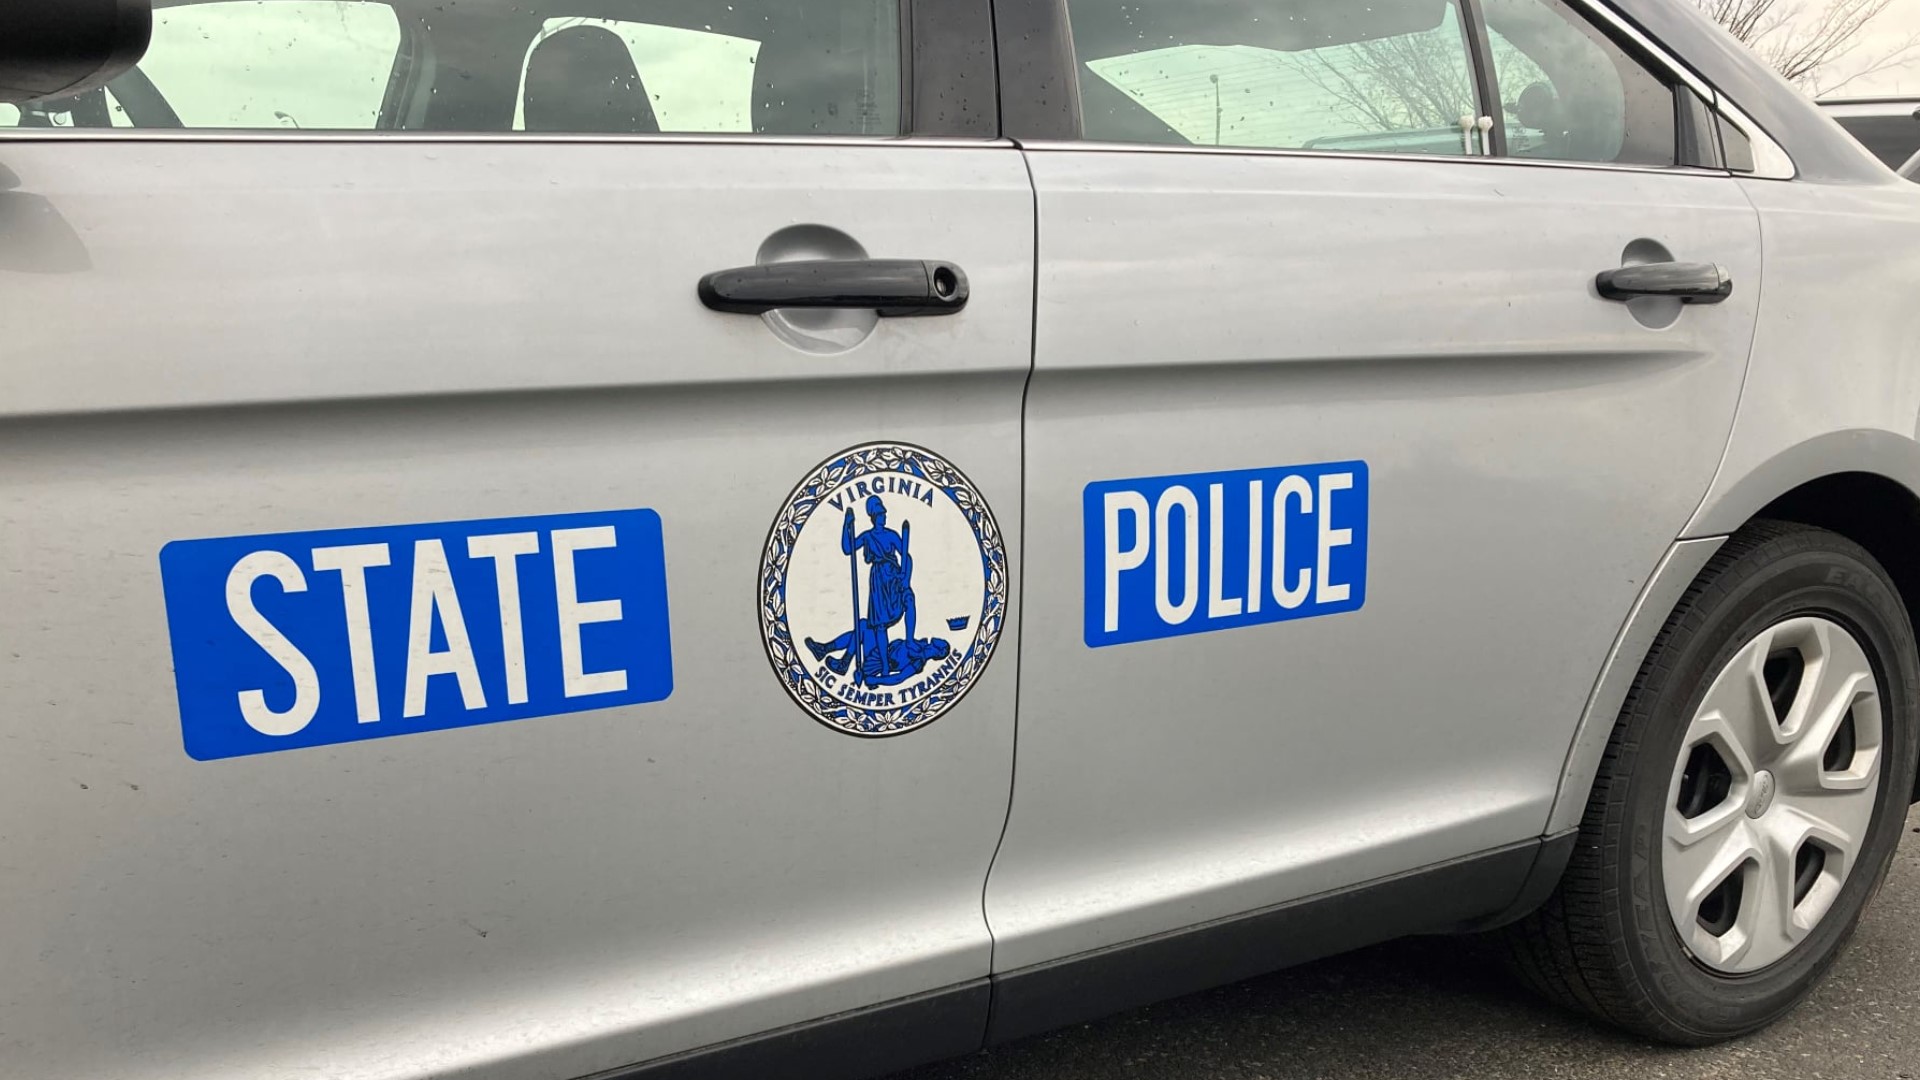 Virginia State Police officers are investigating a shooting they say happened Sunday evening on a highway in Fairfax County, Virginia.